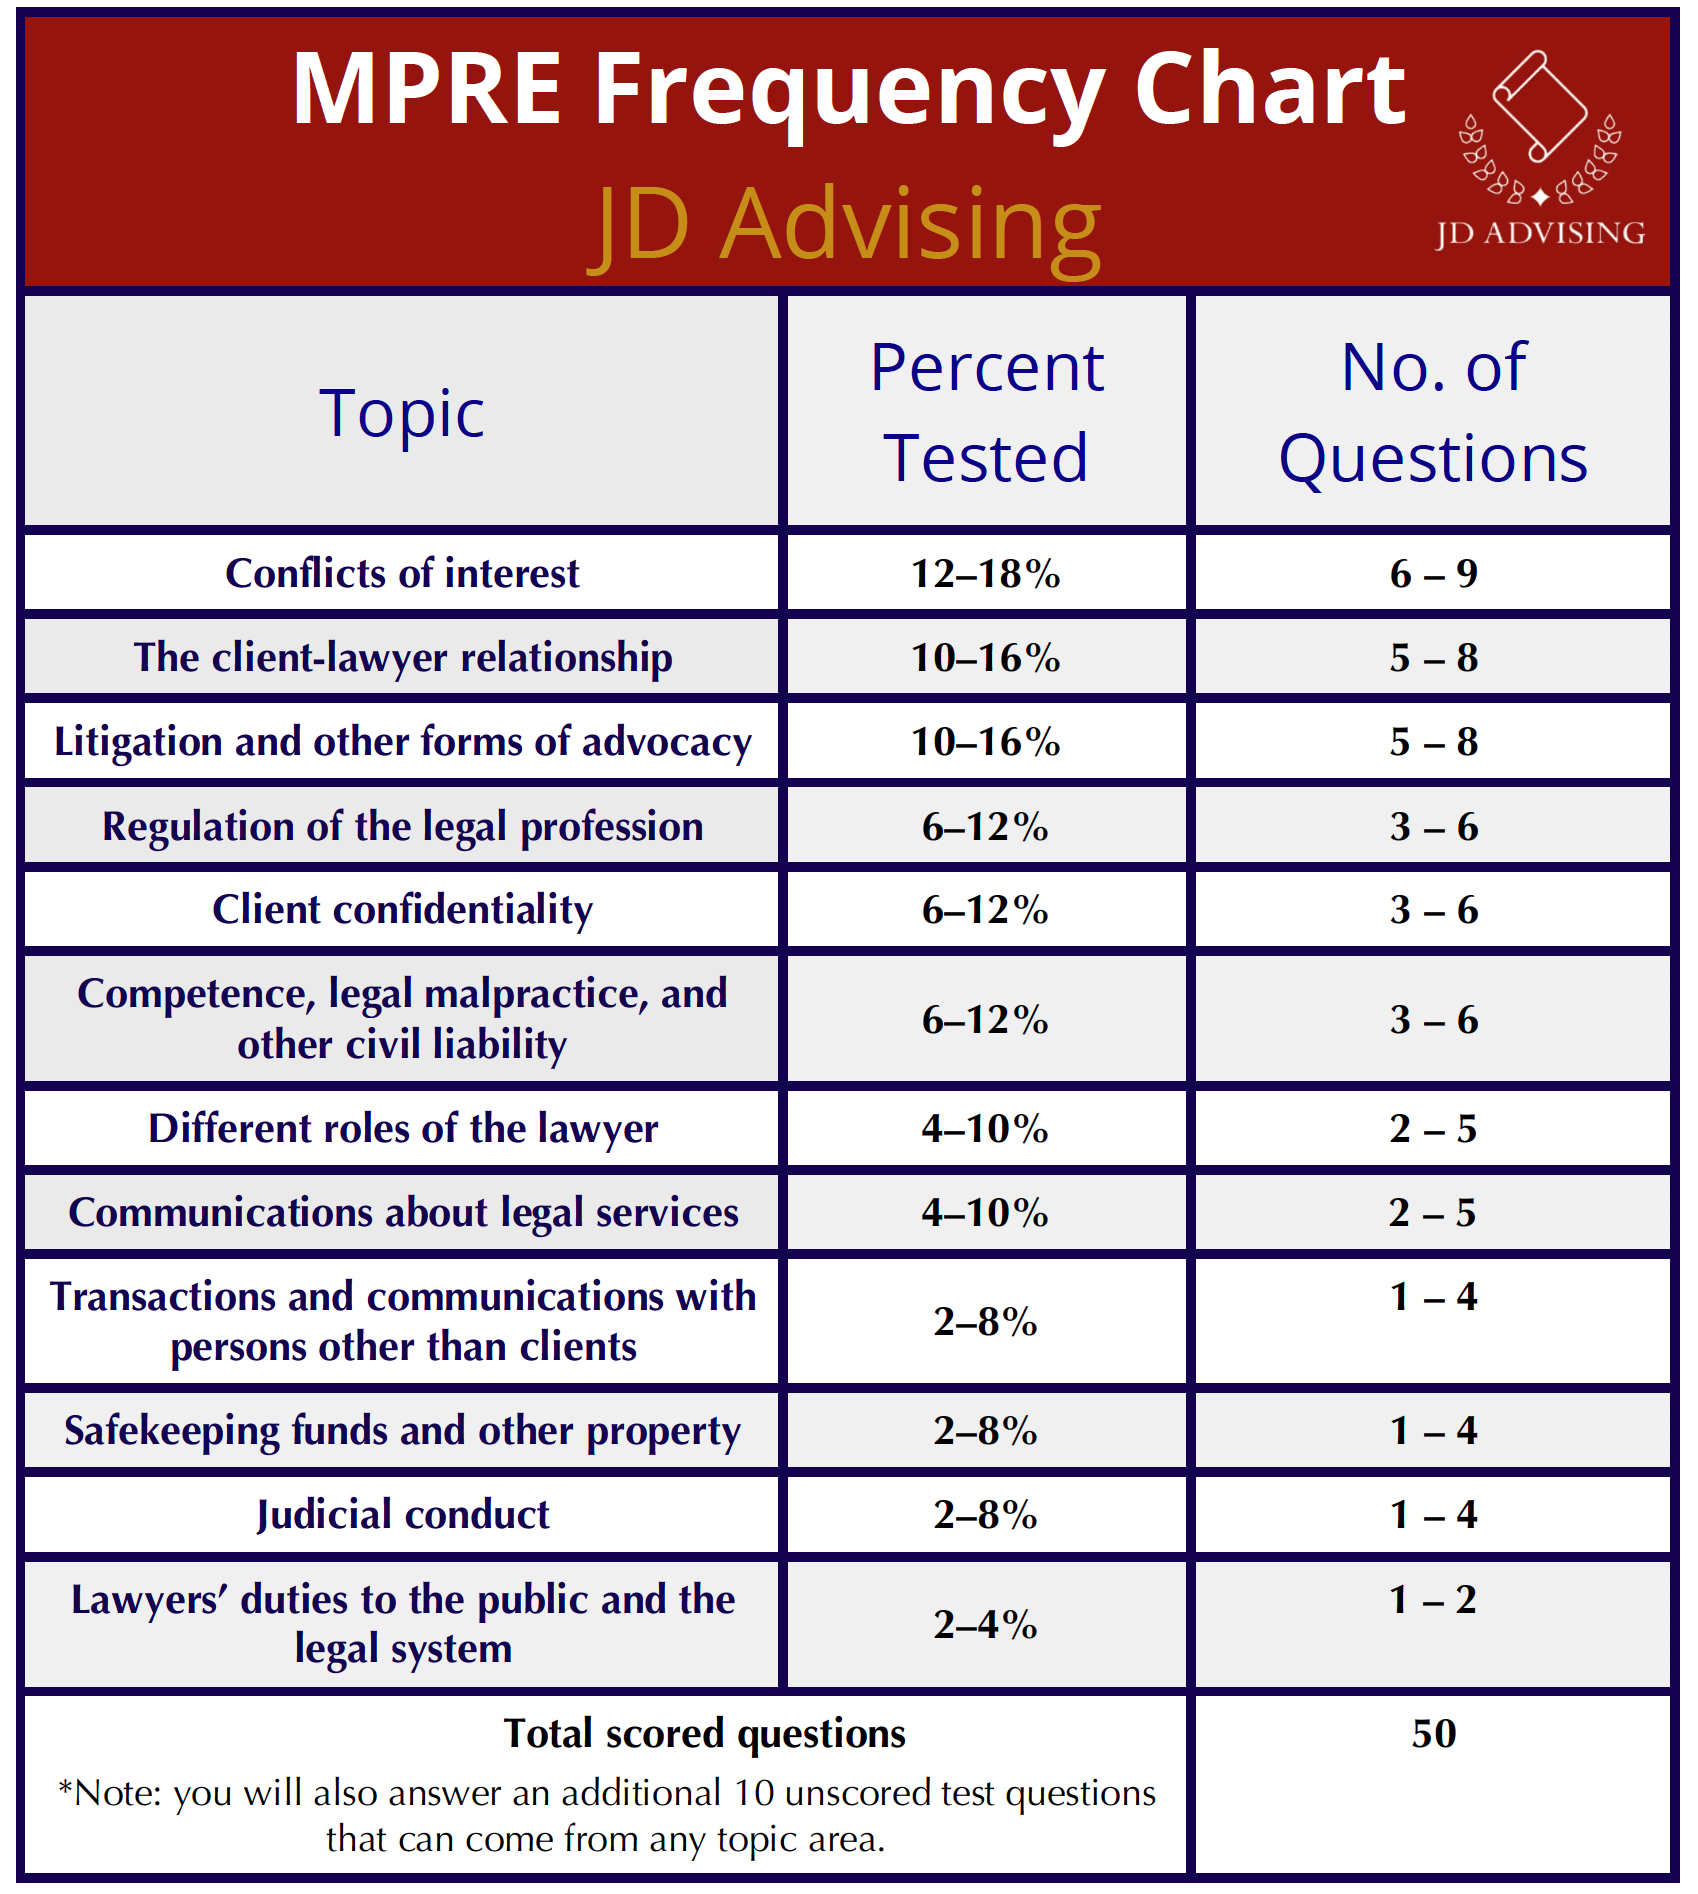 MPRE frequency chart